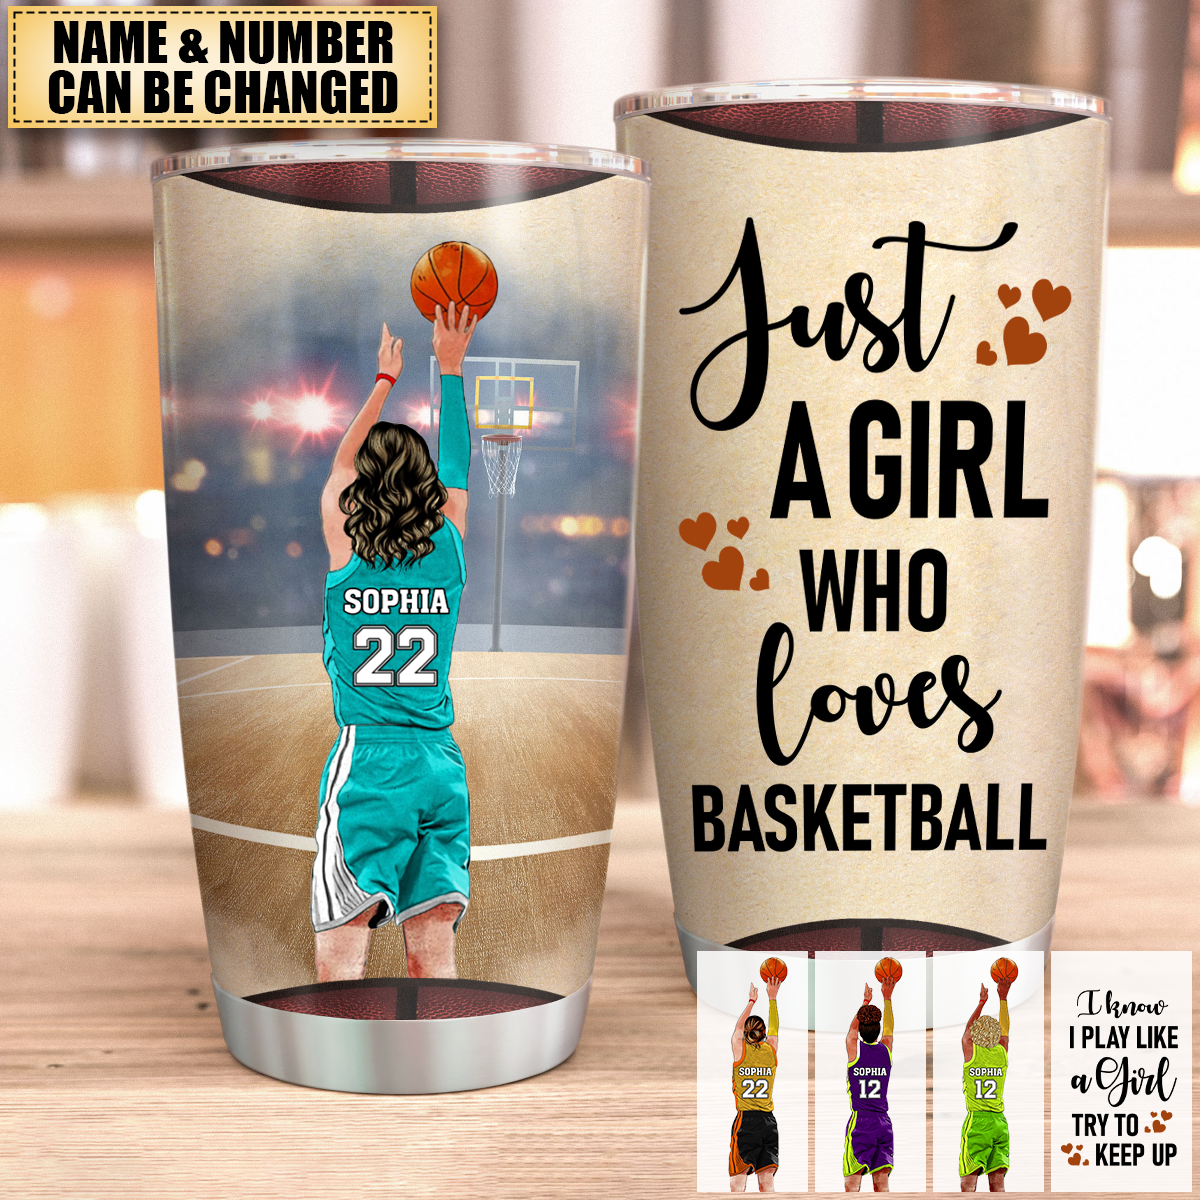 A Girl Loves Basketball - Personalized Tumbler Cup